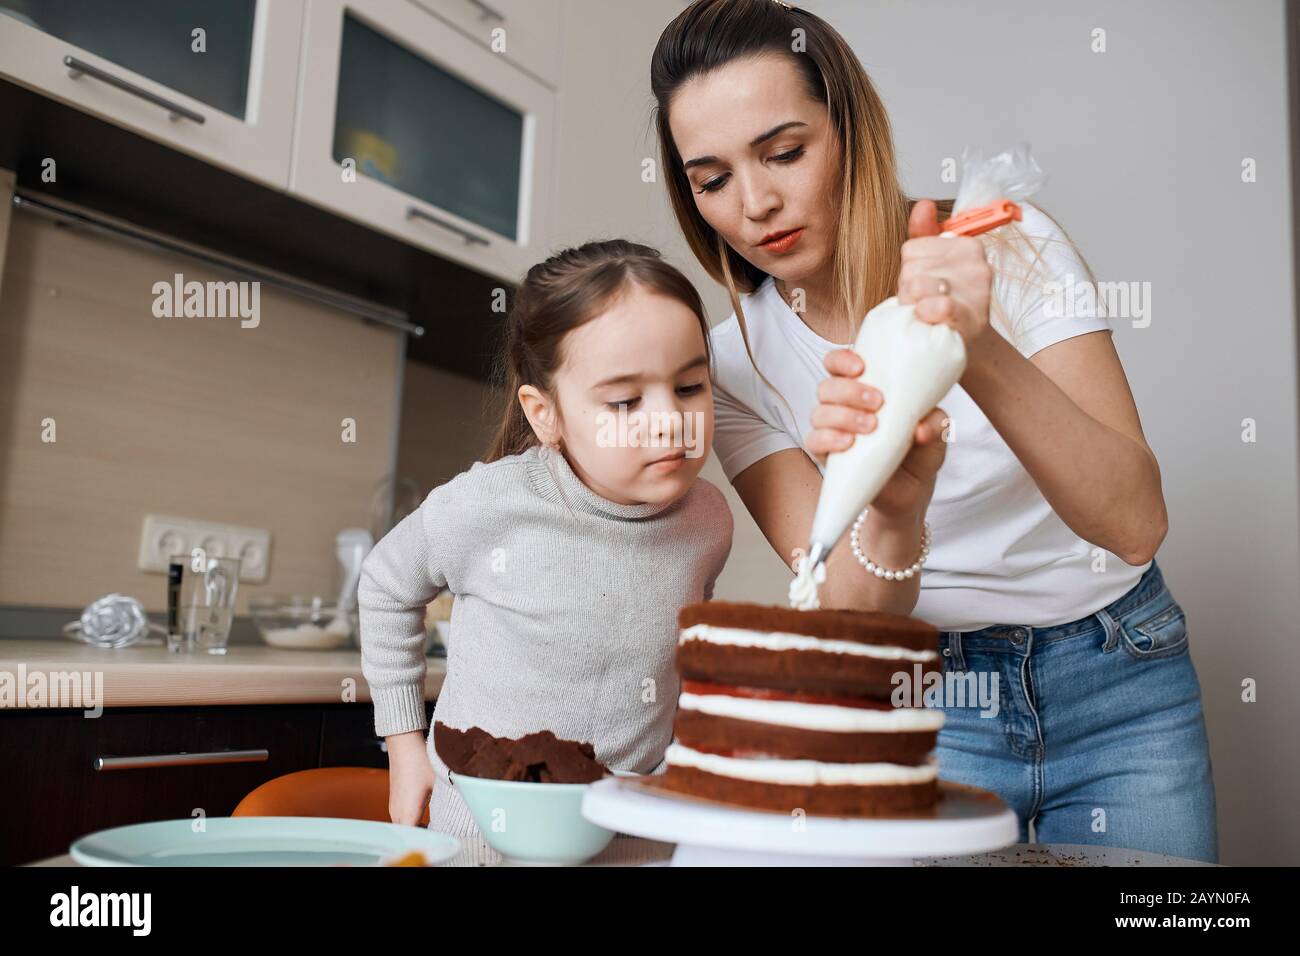 serious little girl and her sisiter preparing cake for their mother, concentration, effort, close up photo Stock Photo